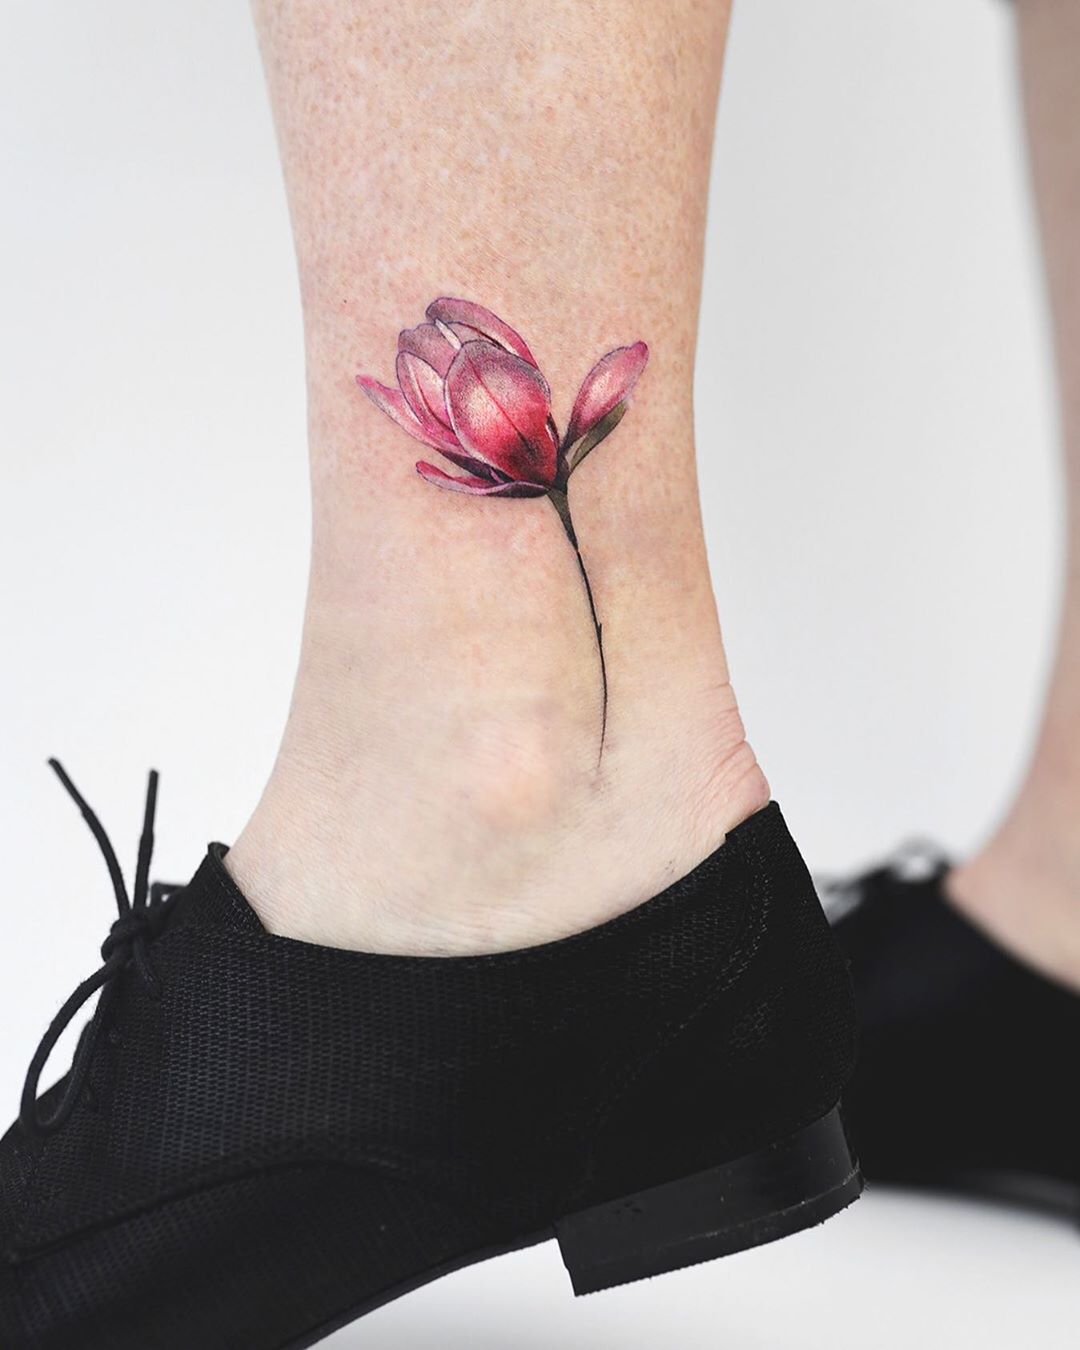 Gorgeous flower on an ankle by Rey Jasper